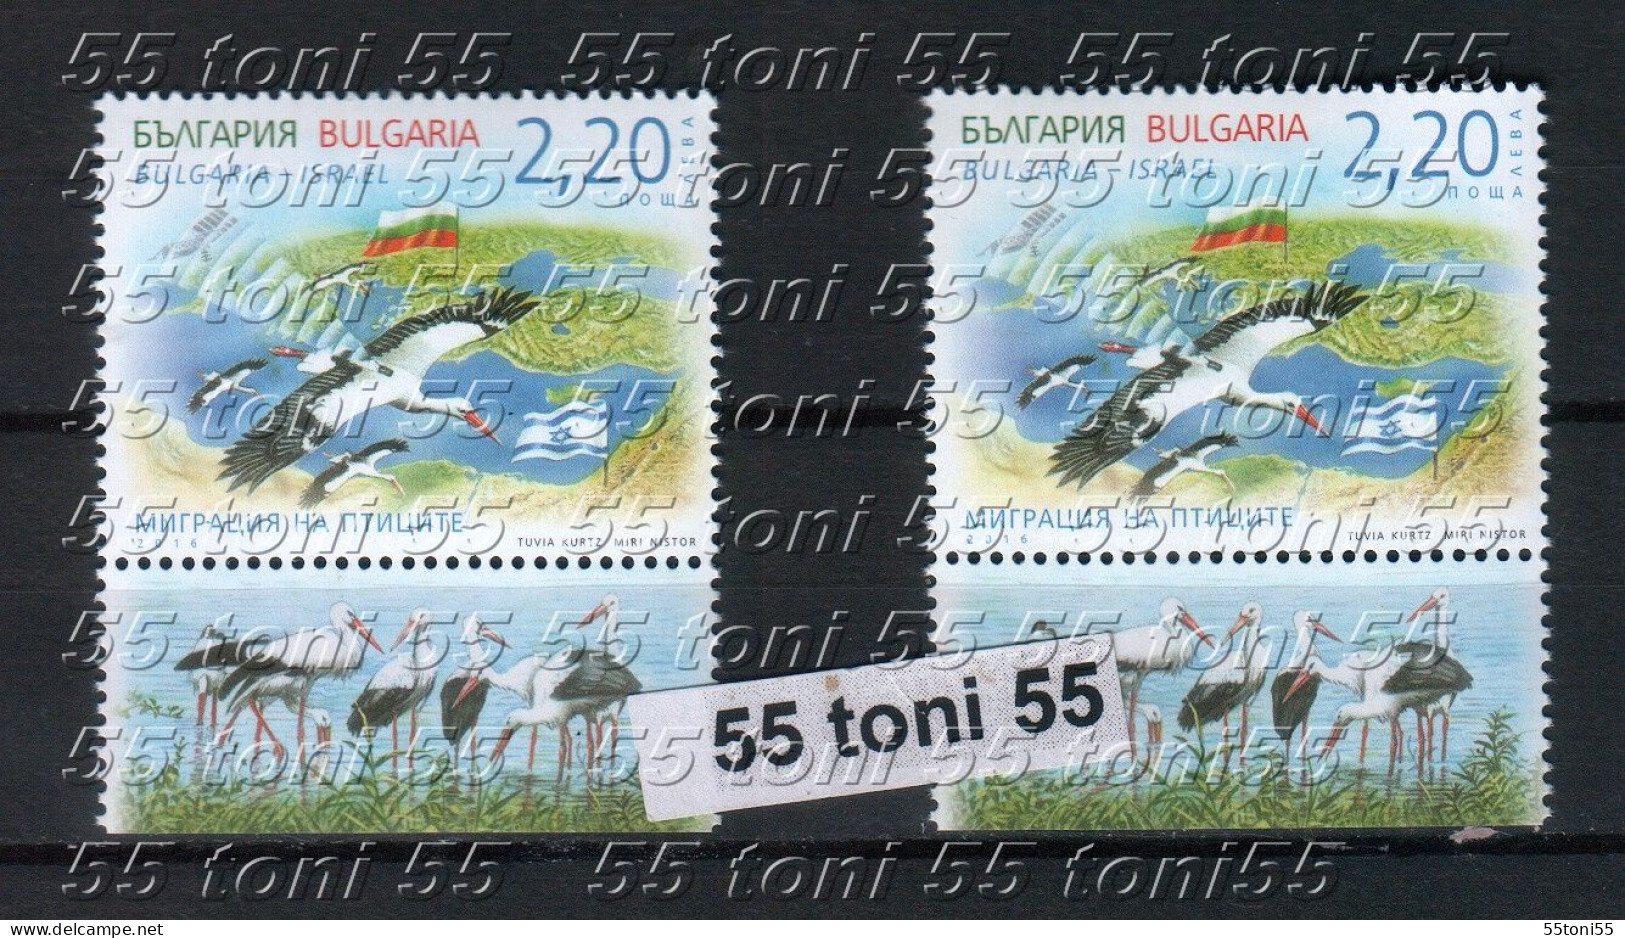 2016 FAUNA / Birds - WHITE STORK ( With Israel) + Vignette UV Threads Paper+normal Paper-MNH - Neufs